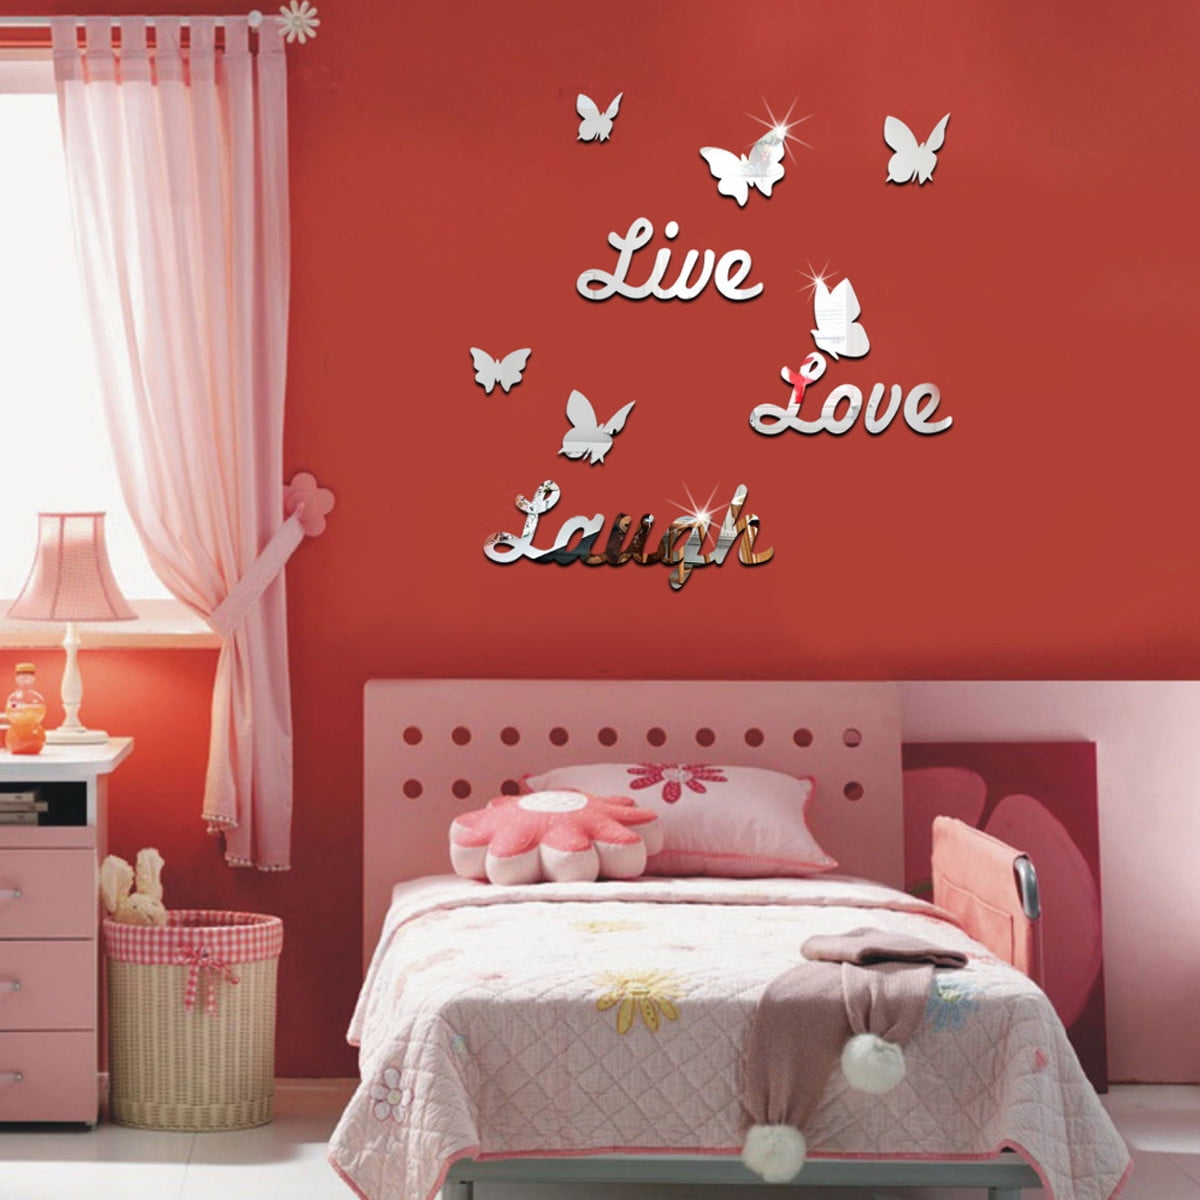 Butterfly Family Where Life Wall Stickers Decor Mural Vinyl Home Room Decal Sale 